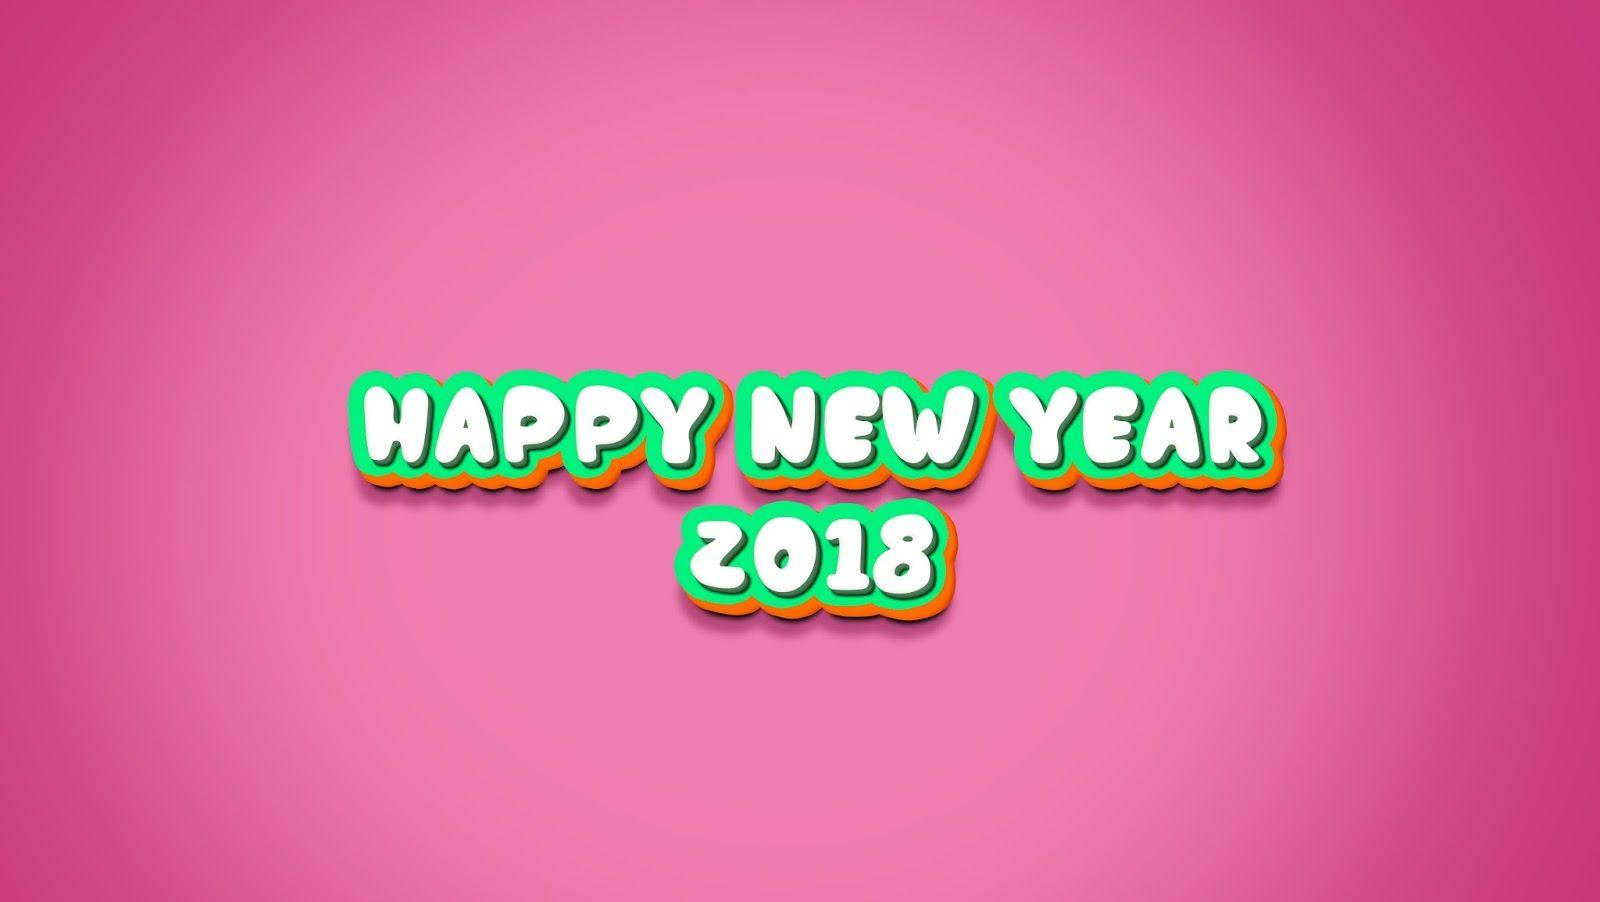 Happy New Year 2018 Image Download Happy New Year 2018 Image